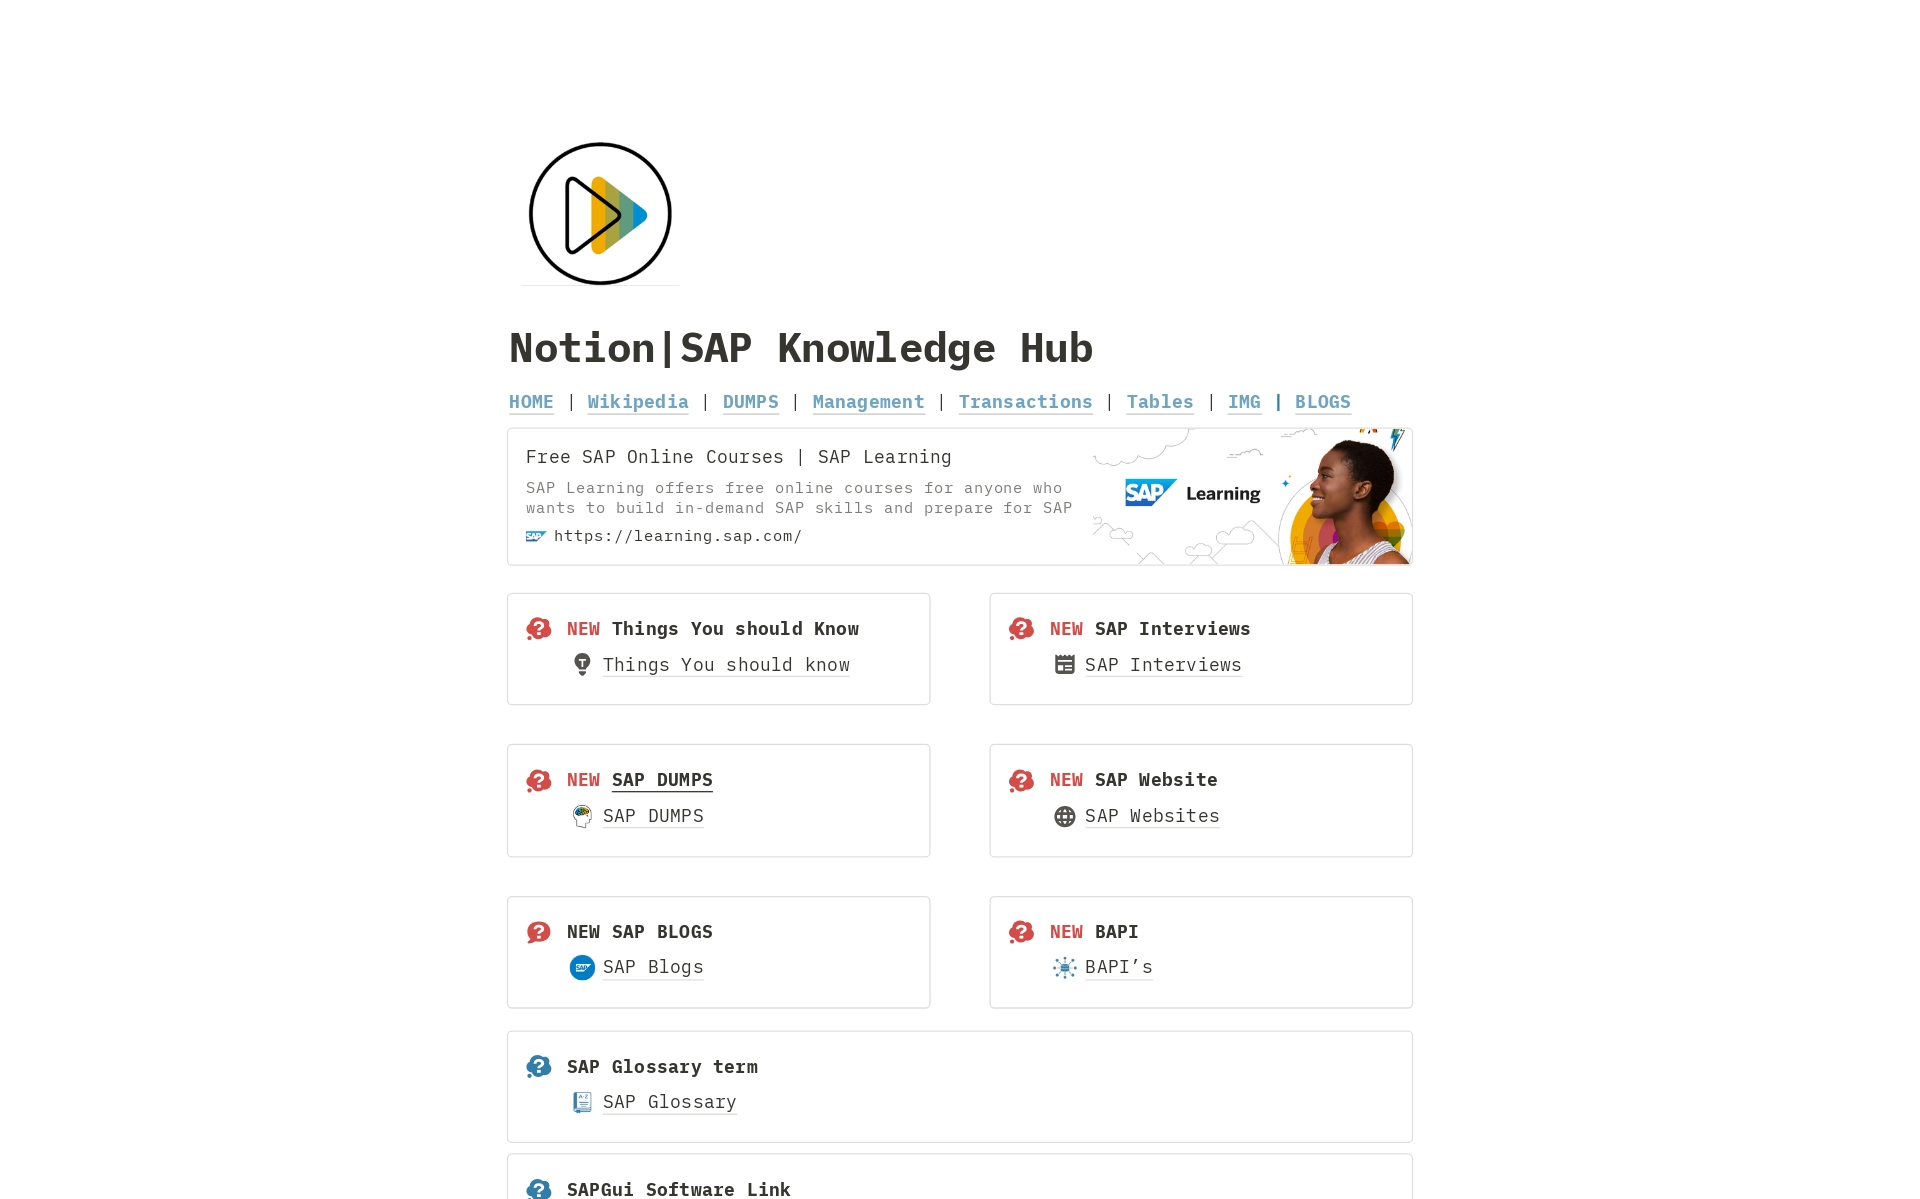 SAP Knowledge Hub is a Notion template that provides SAP Consultants with access to a wide range of learning resources, including training material, SAP documentation, best practices and expert insights.